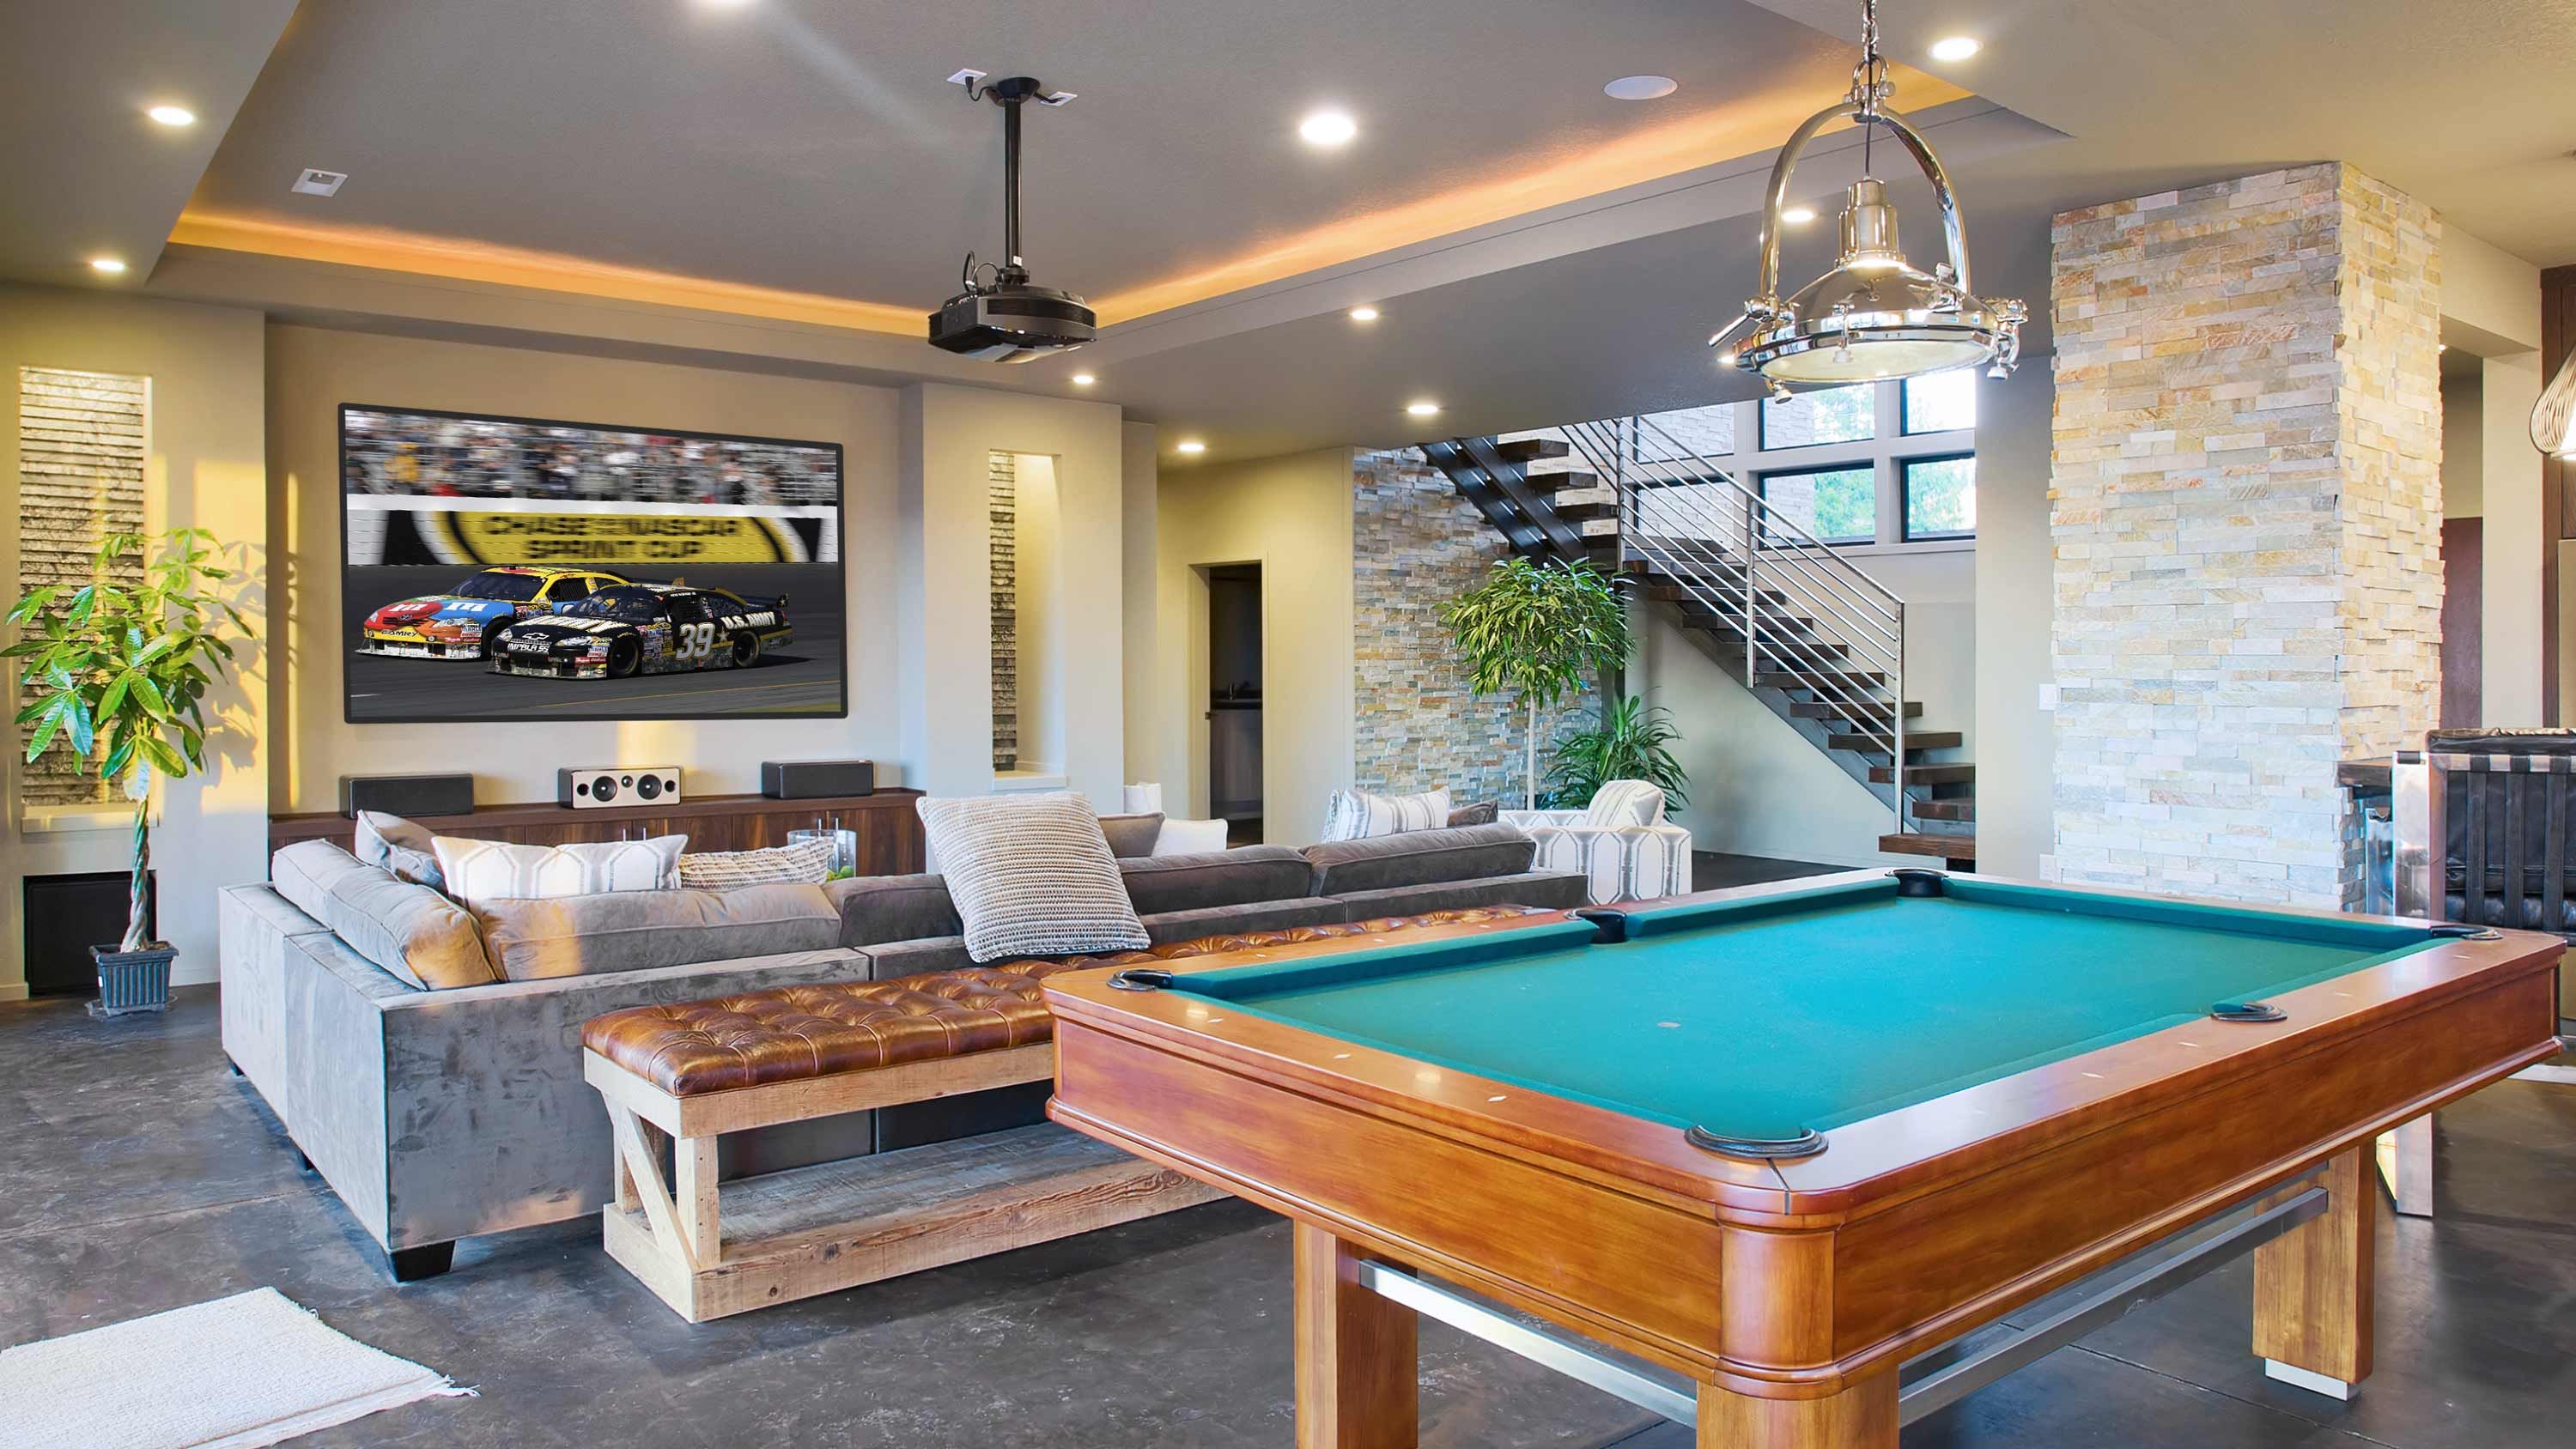 Control4 Dealer Austin, TX, home control, indoor automation, home automation, bar and game room, smart home control4